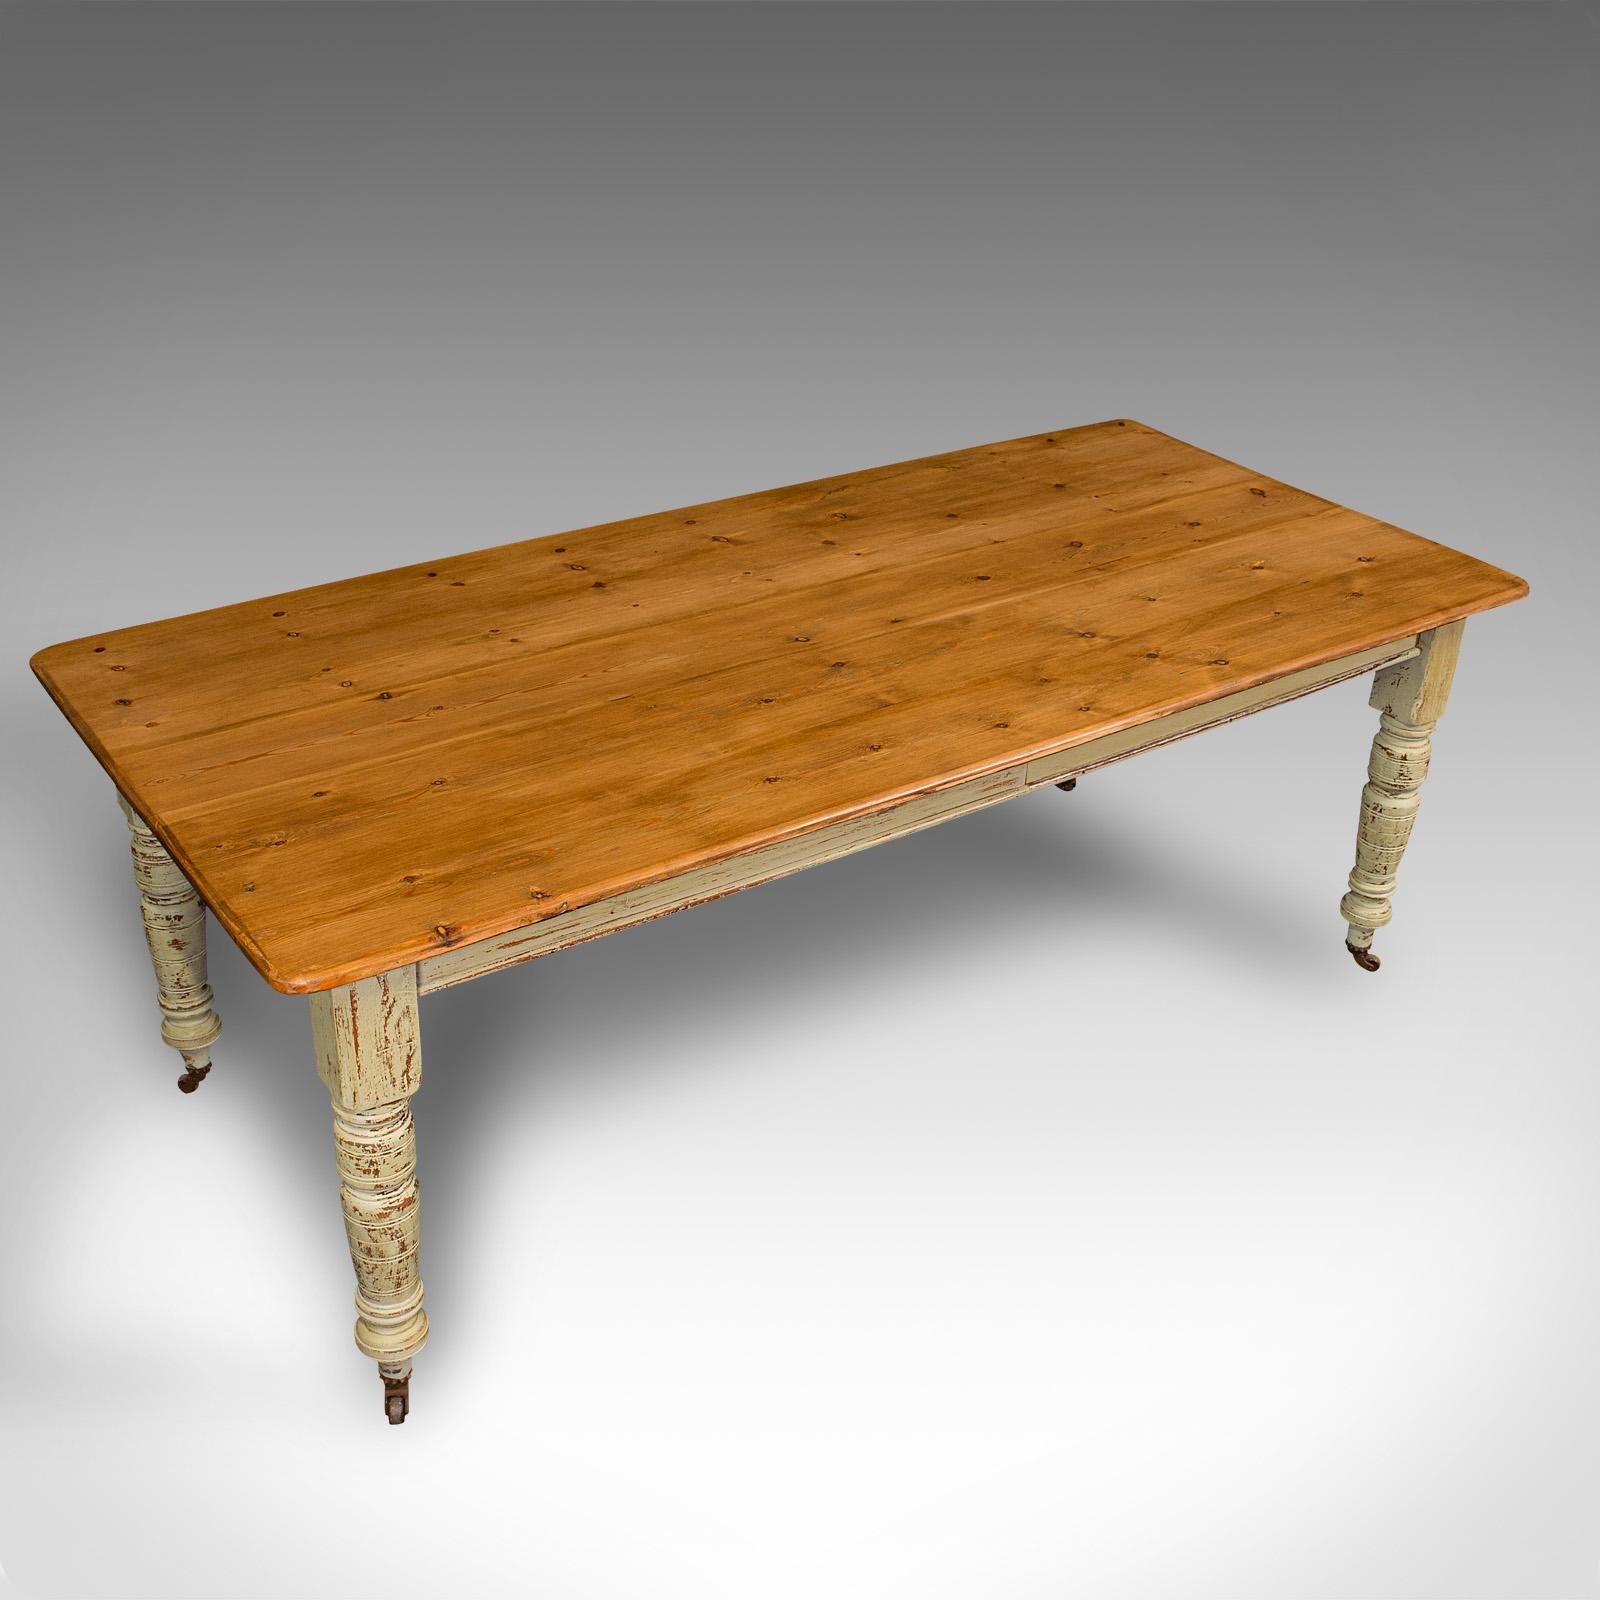 Antique Farmhouse Table, English, Pine, 6 Seat, Dining, Kitchen, Victorian, 1900 For Sale 1